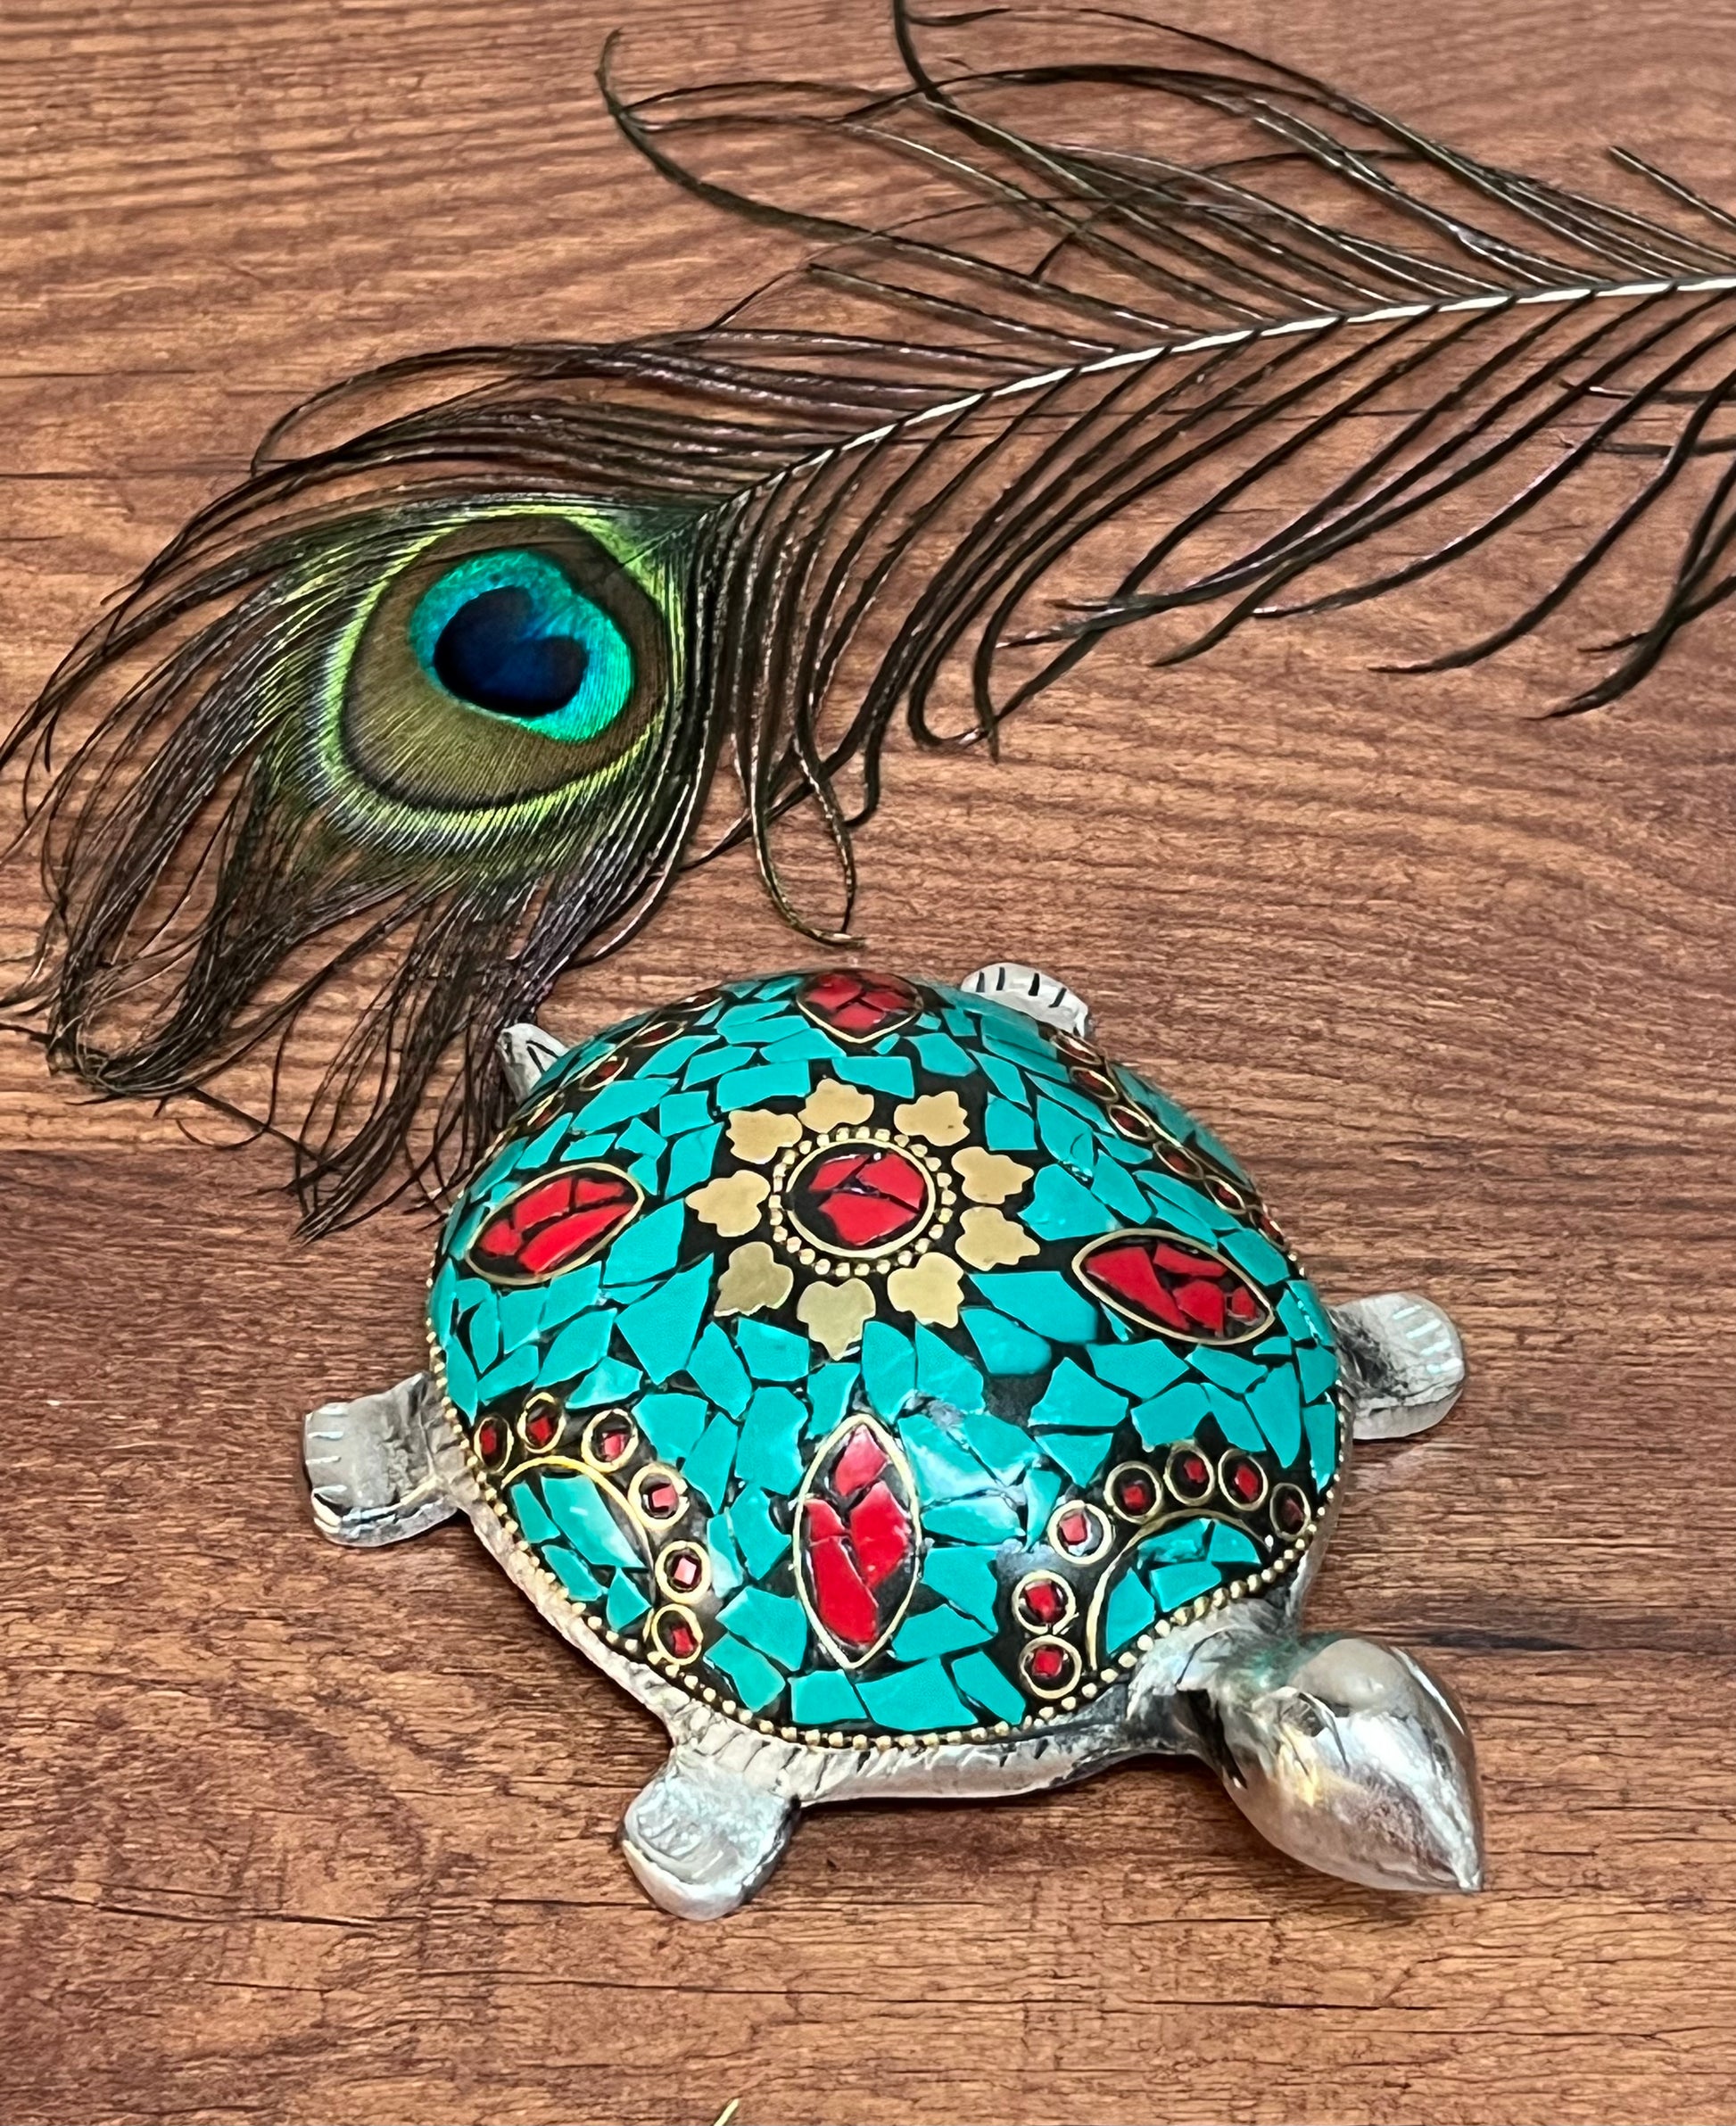 Image of Turtle with Mosaic Stone with Resin Stone.  The Source India is an Indian Handicraft, Home Decor, Furnishing and Textiles Store. Our Mission is to allow the enhancement of India's Culture